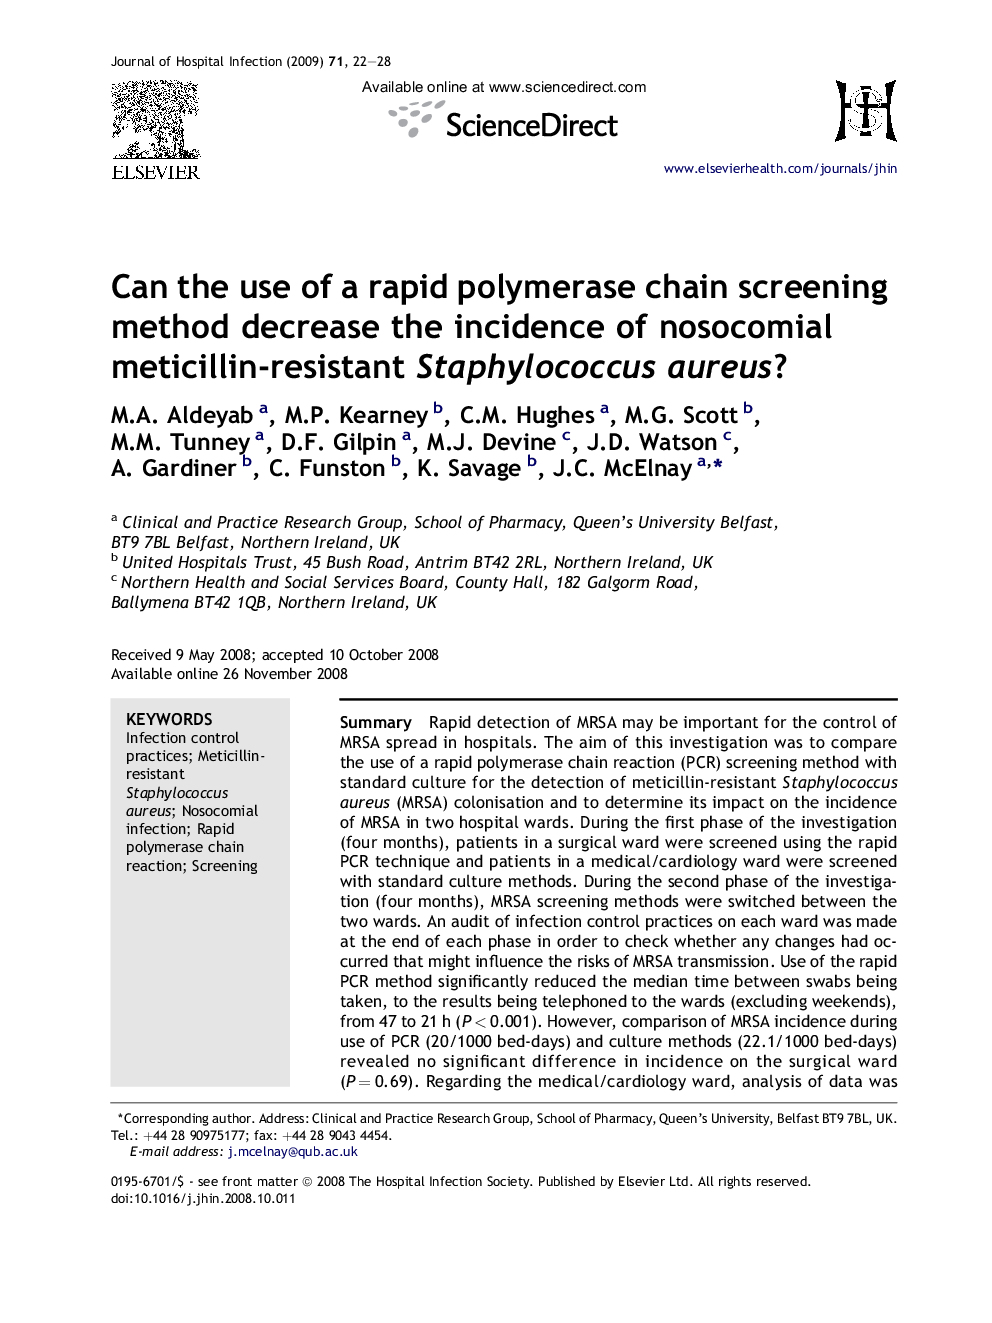 Can the use of a rapid polymerase chain screening method decrease the incidence of nosocomial meticillin-resistant Staphylococcus aureus?